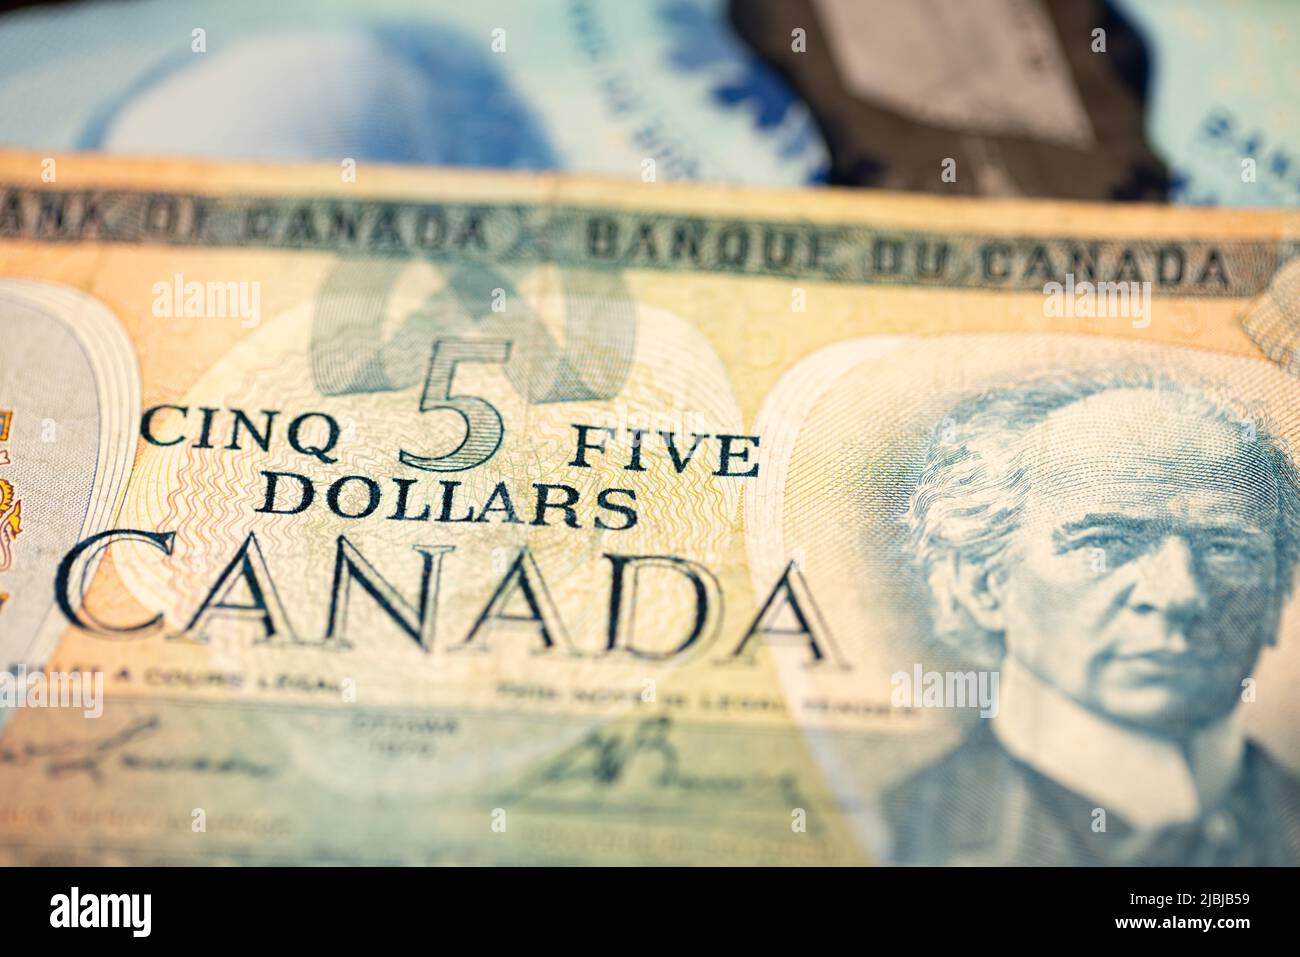 Manhattan, New York/USA - April 8. 2021: Old and new canadian dollar banknote. Five canadian dollar bill Stock Photo